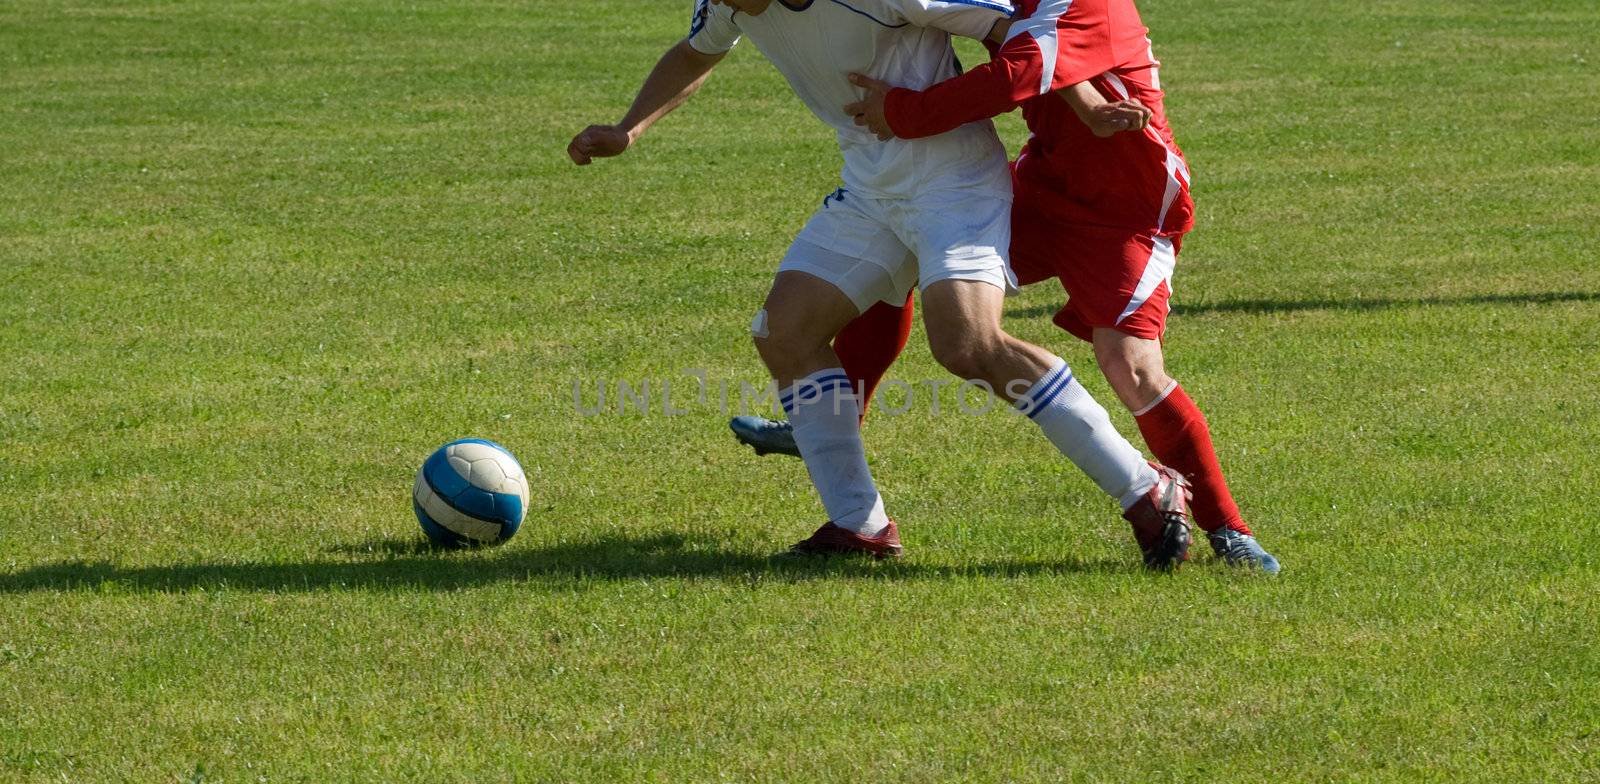 Players in the red and white form play a ball